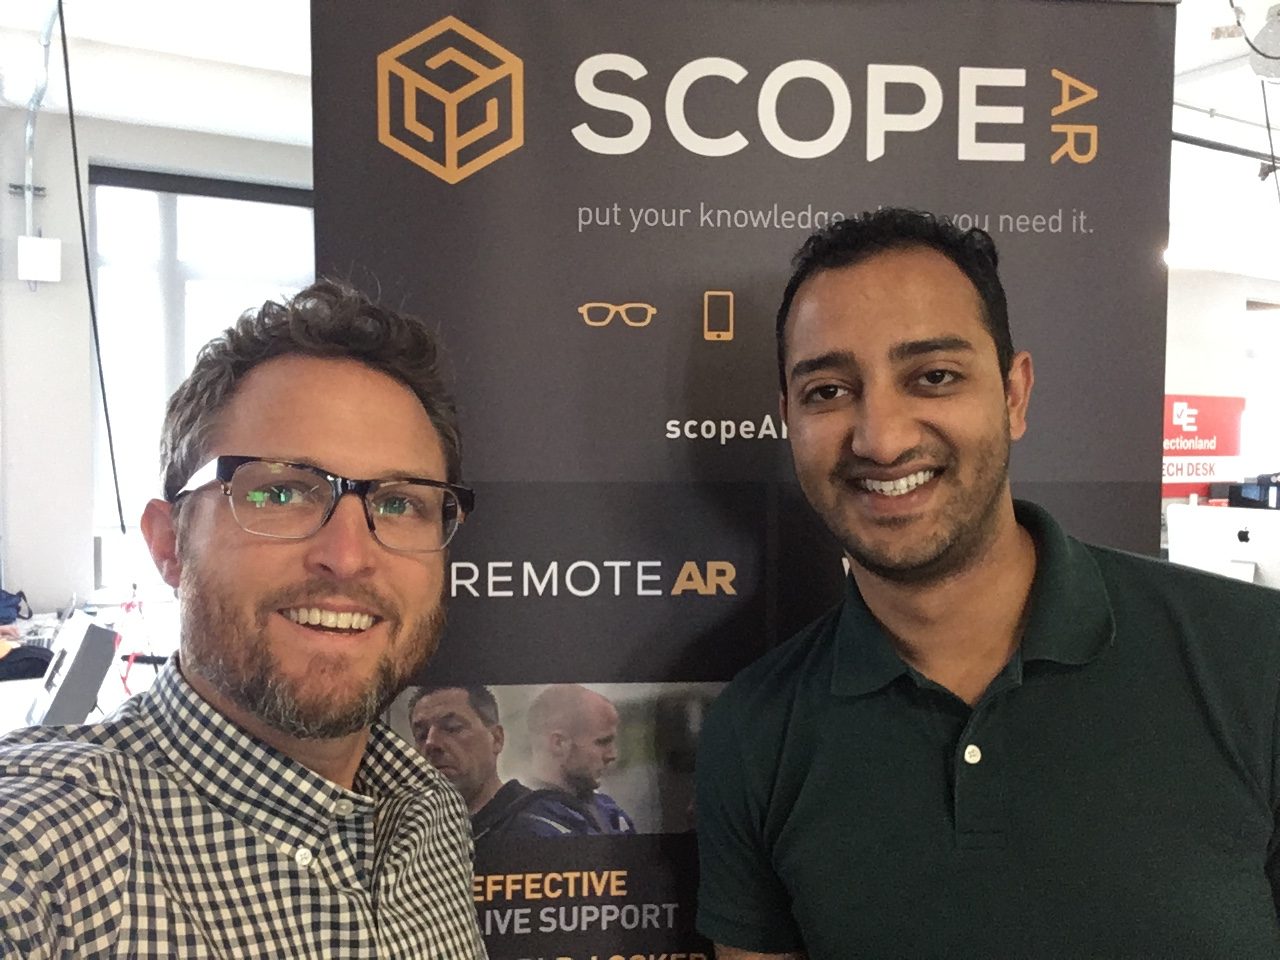 Paul demoing Scope AR's Remote AR and WorkLink products with Director of Sales & Business Development Nayan Mehta